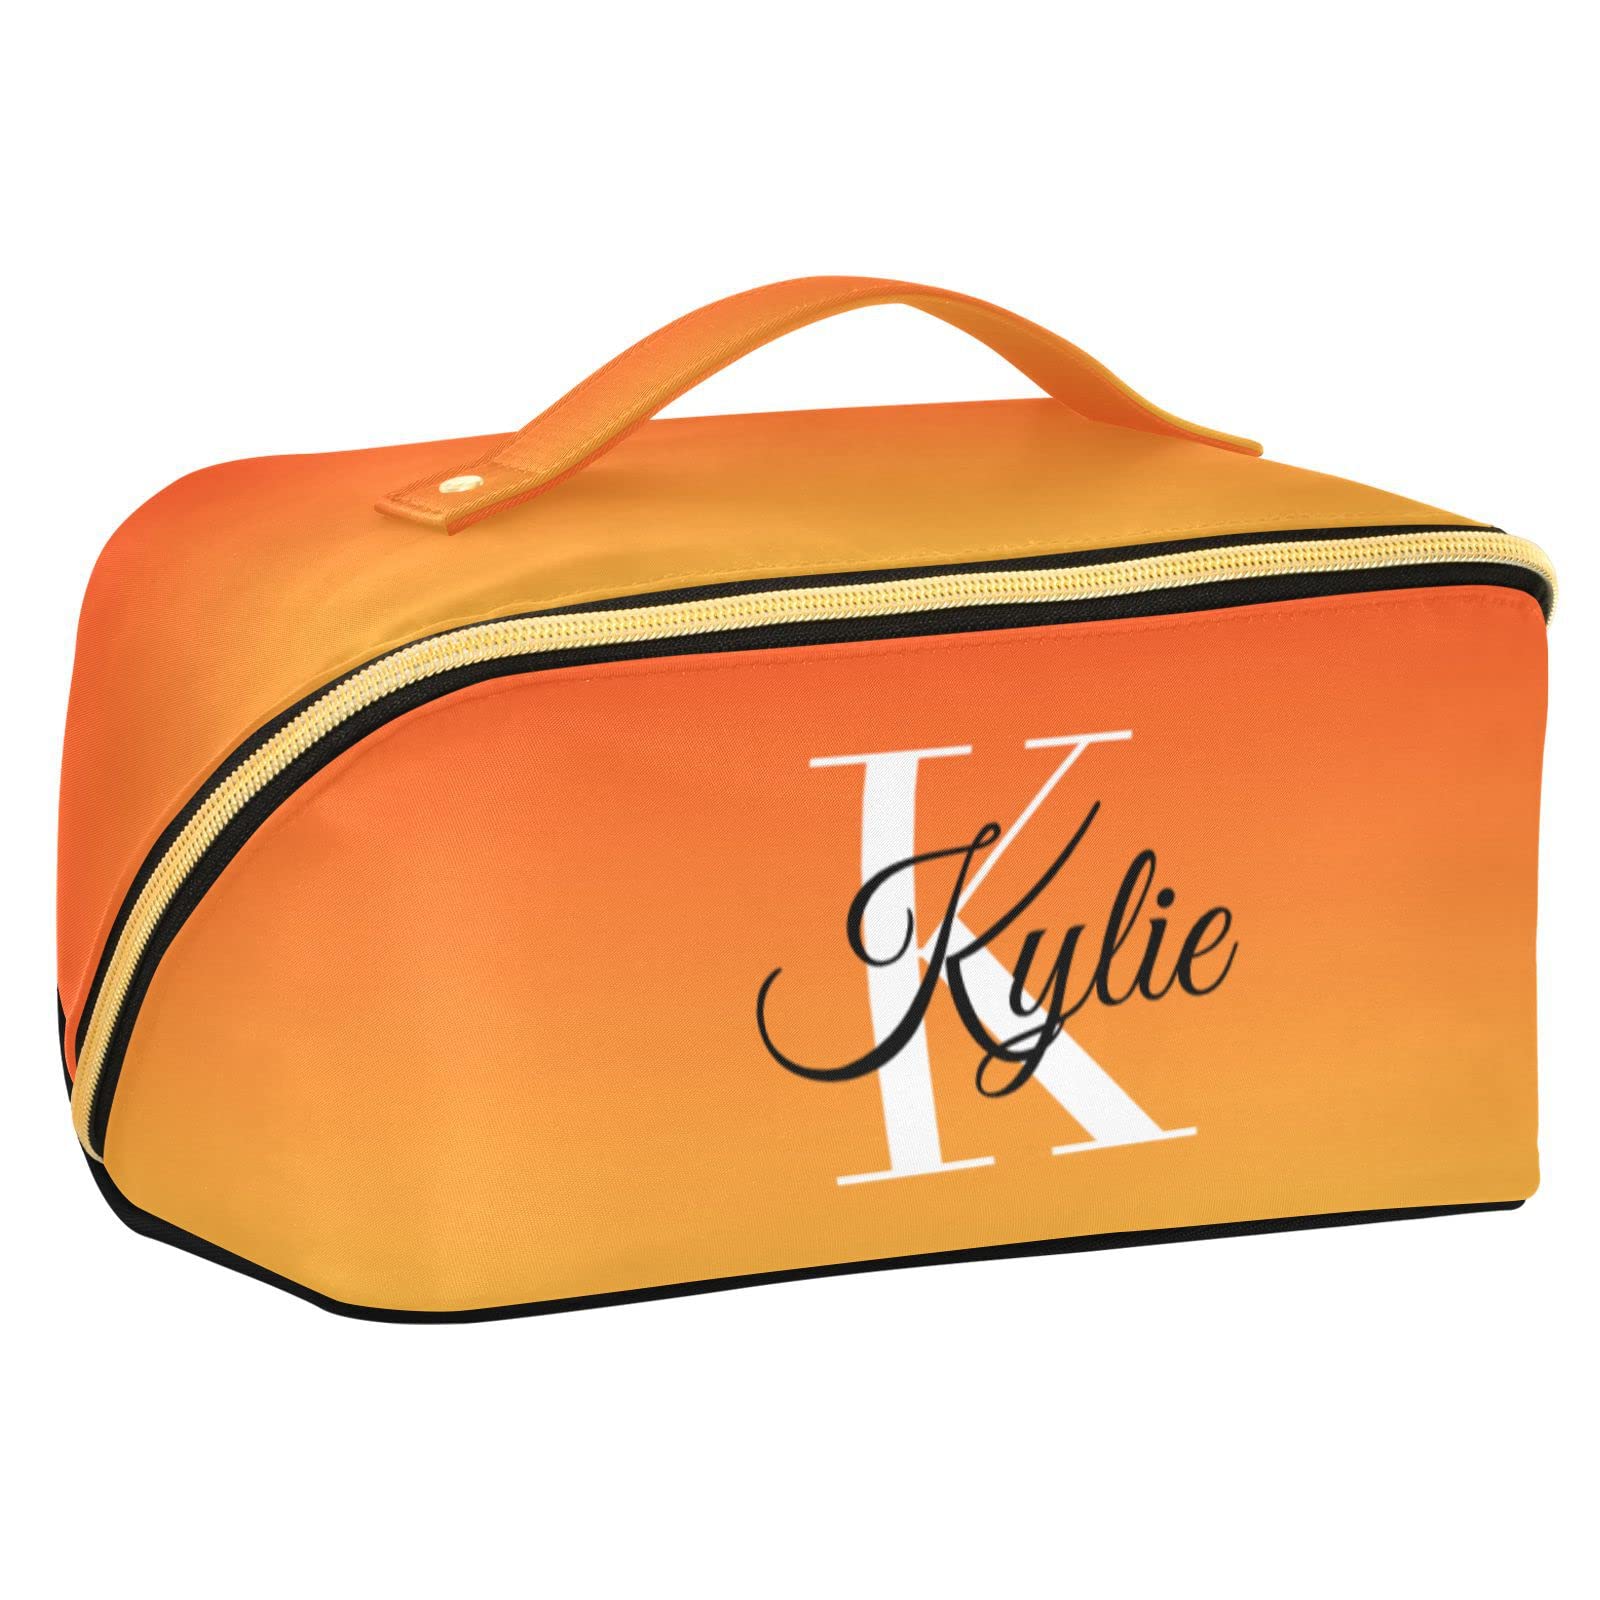 Sinestour Orange Gradient Personalized Makeup Bag Custom Cosmetic Bags for Women Travel Makeup Bags for Women Cosmetic Bag Organizer Makeup Pouch Toiletry Bag for Travel Daily Use Cosmetics